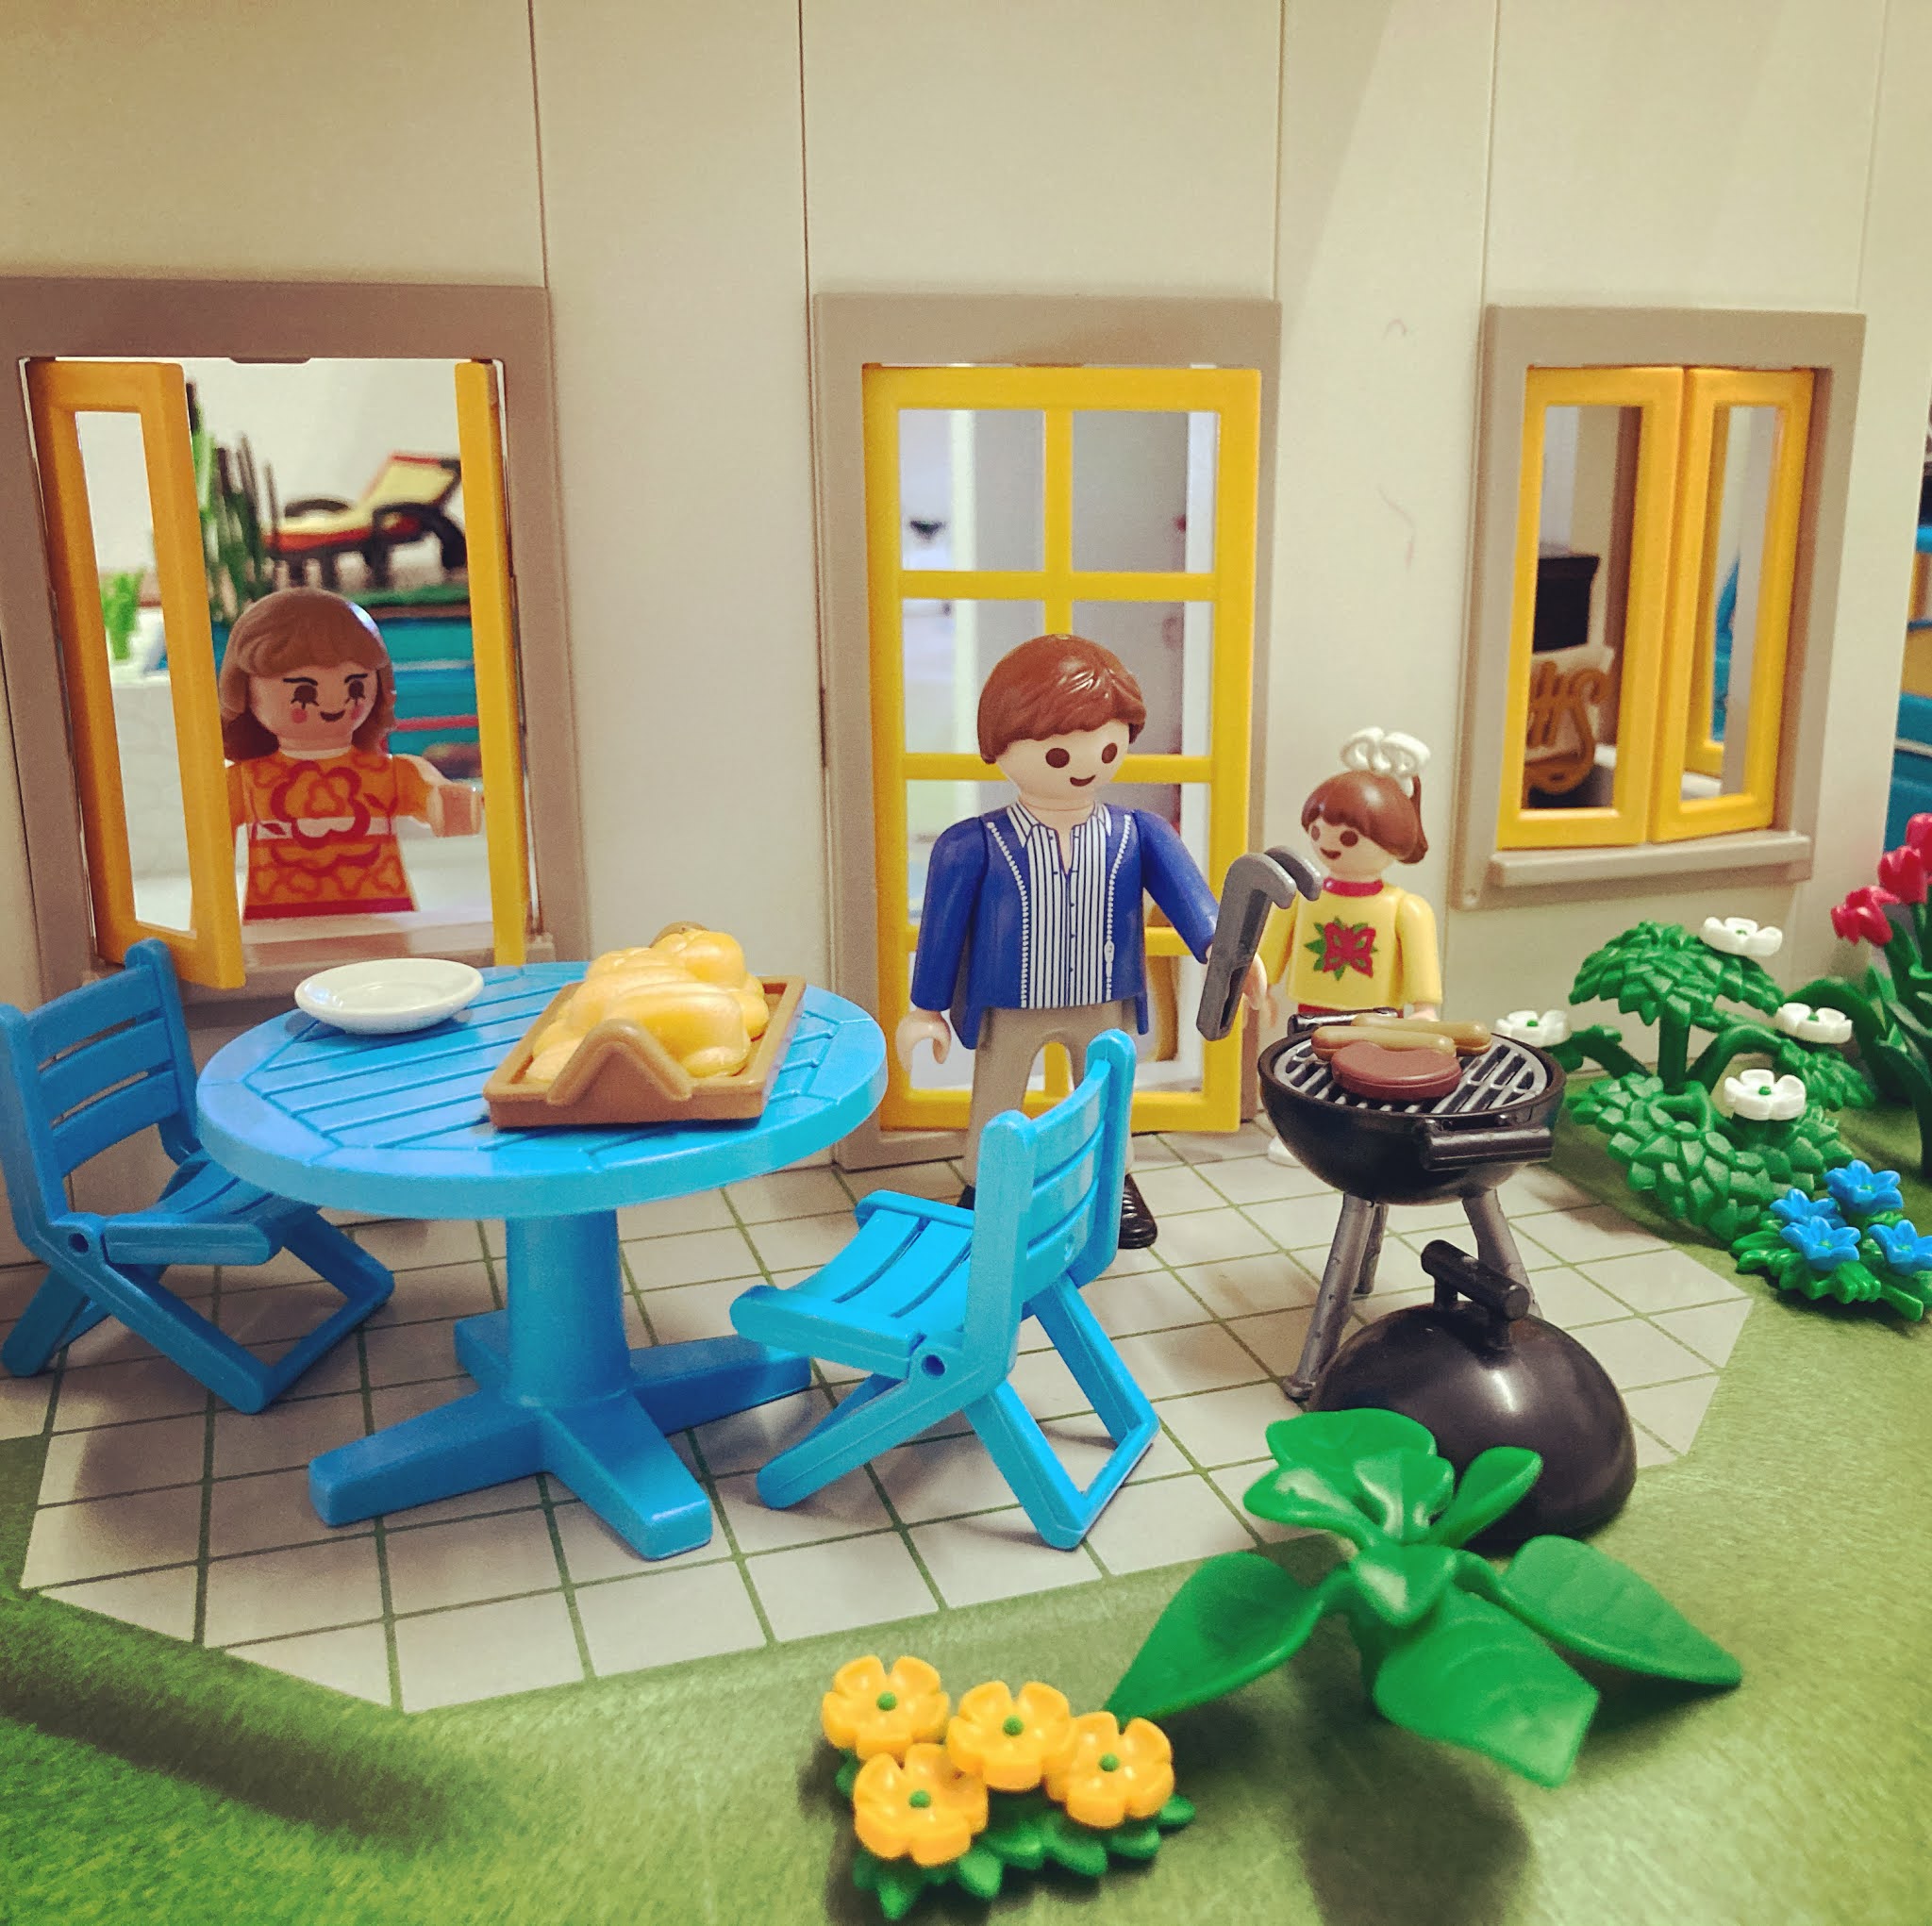 Jane Chérie: A Review of the Playmobil Suburban Dollhouse